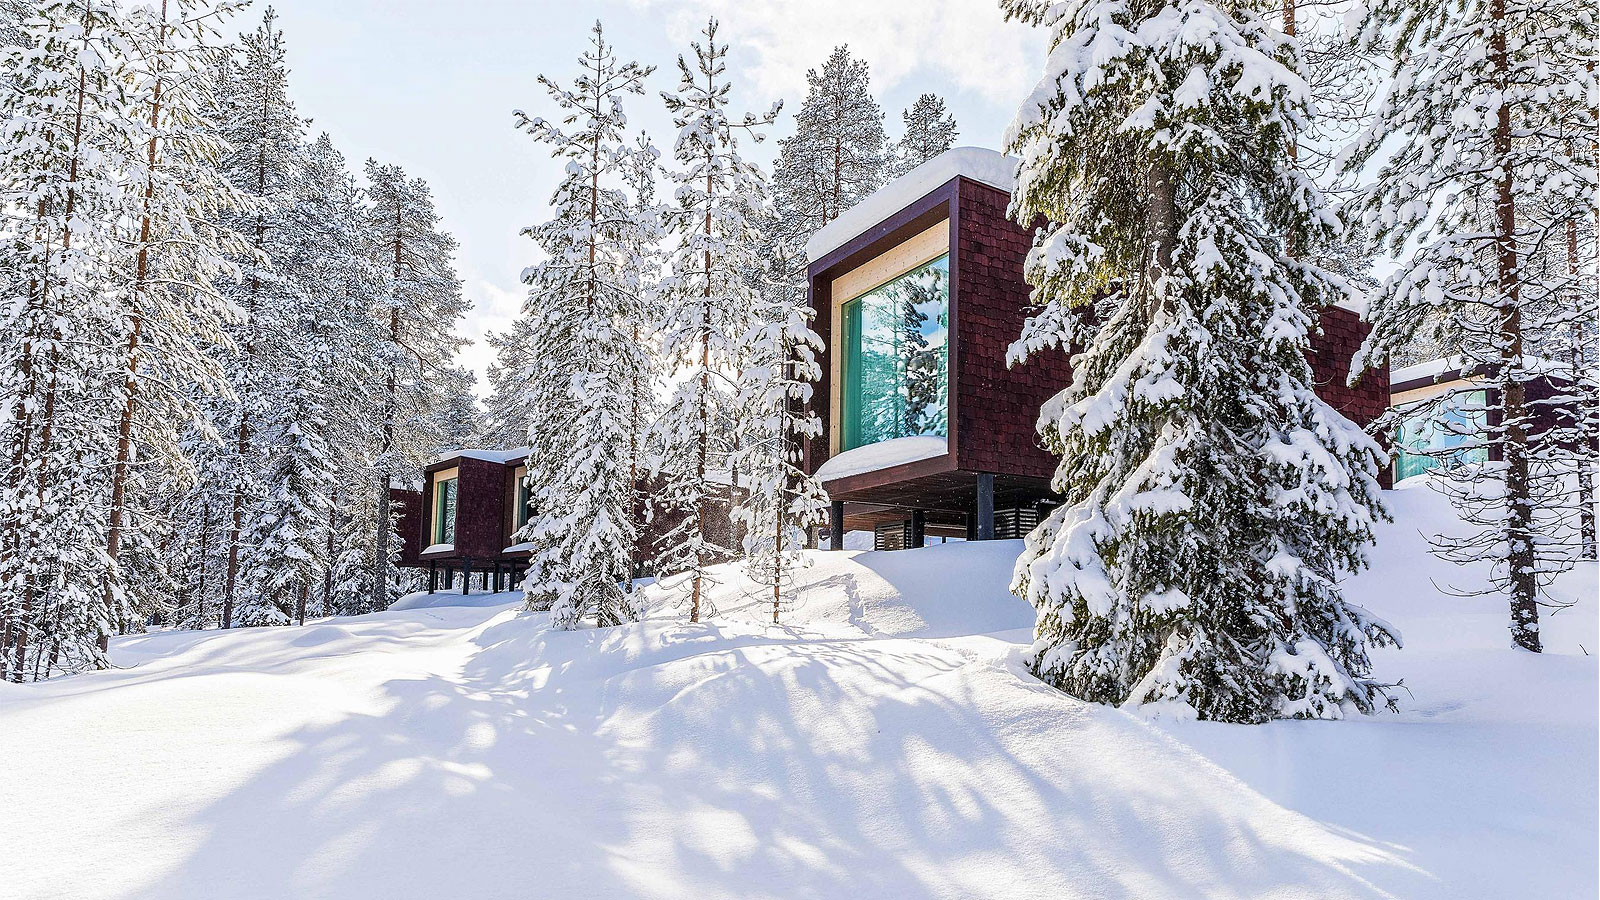 Arctic TreeHouse Hotel, Finland